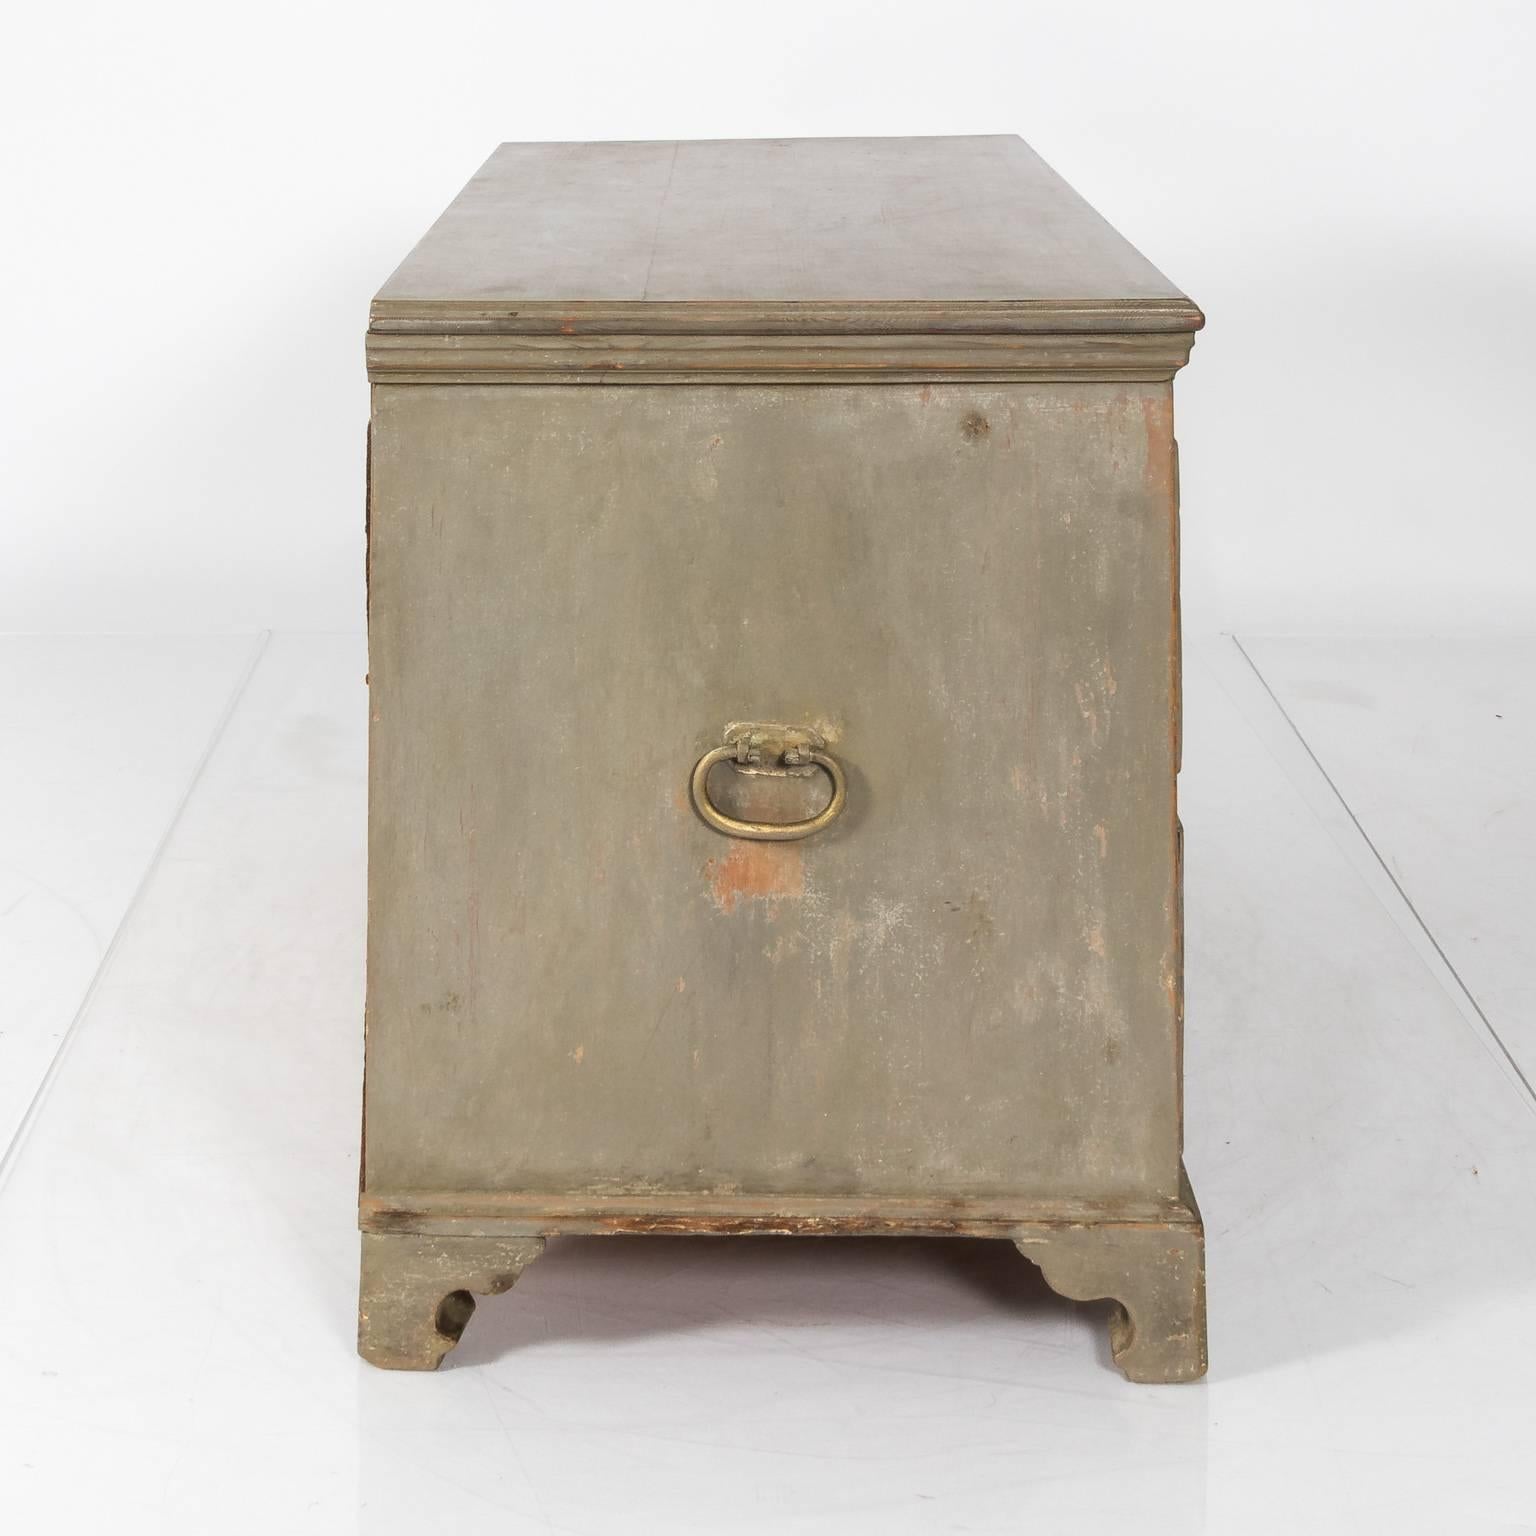 A grey-painted early 19th century Gustavian dresser with two drawers.
 